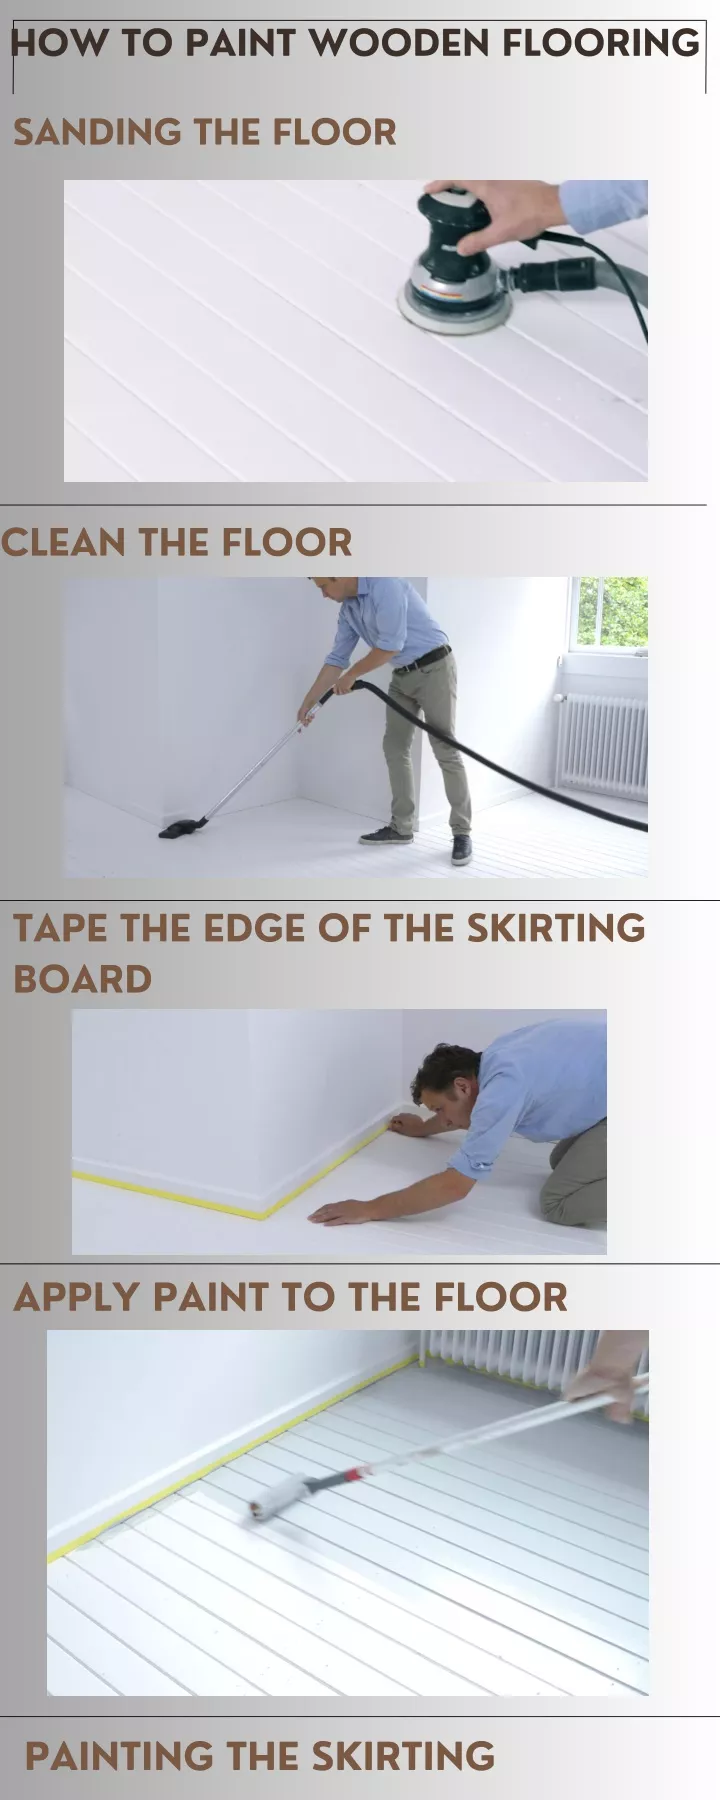 how to paint wooden flooring